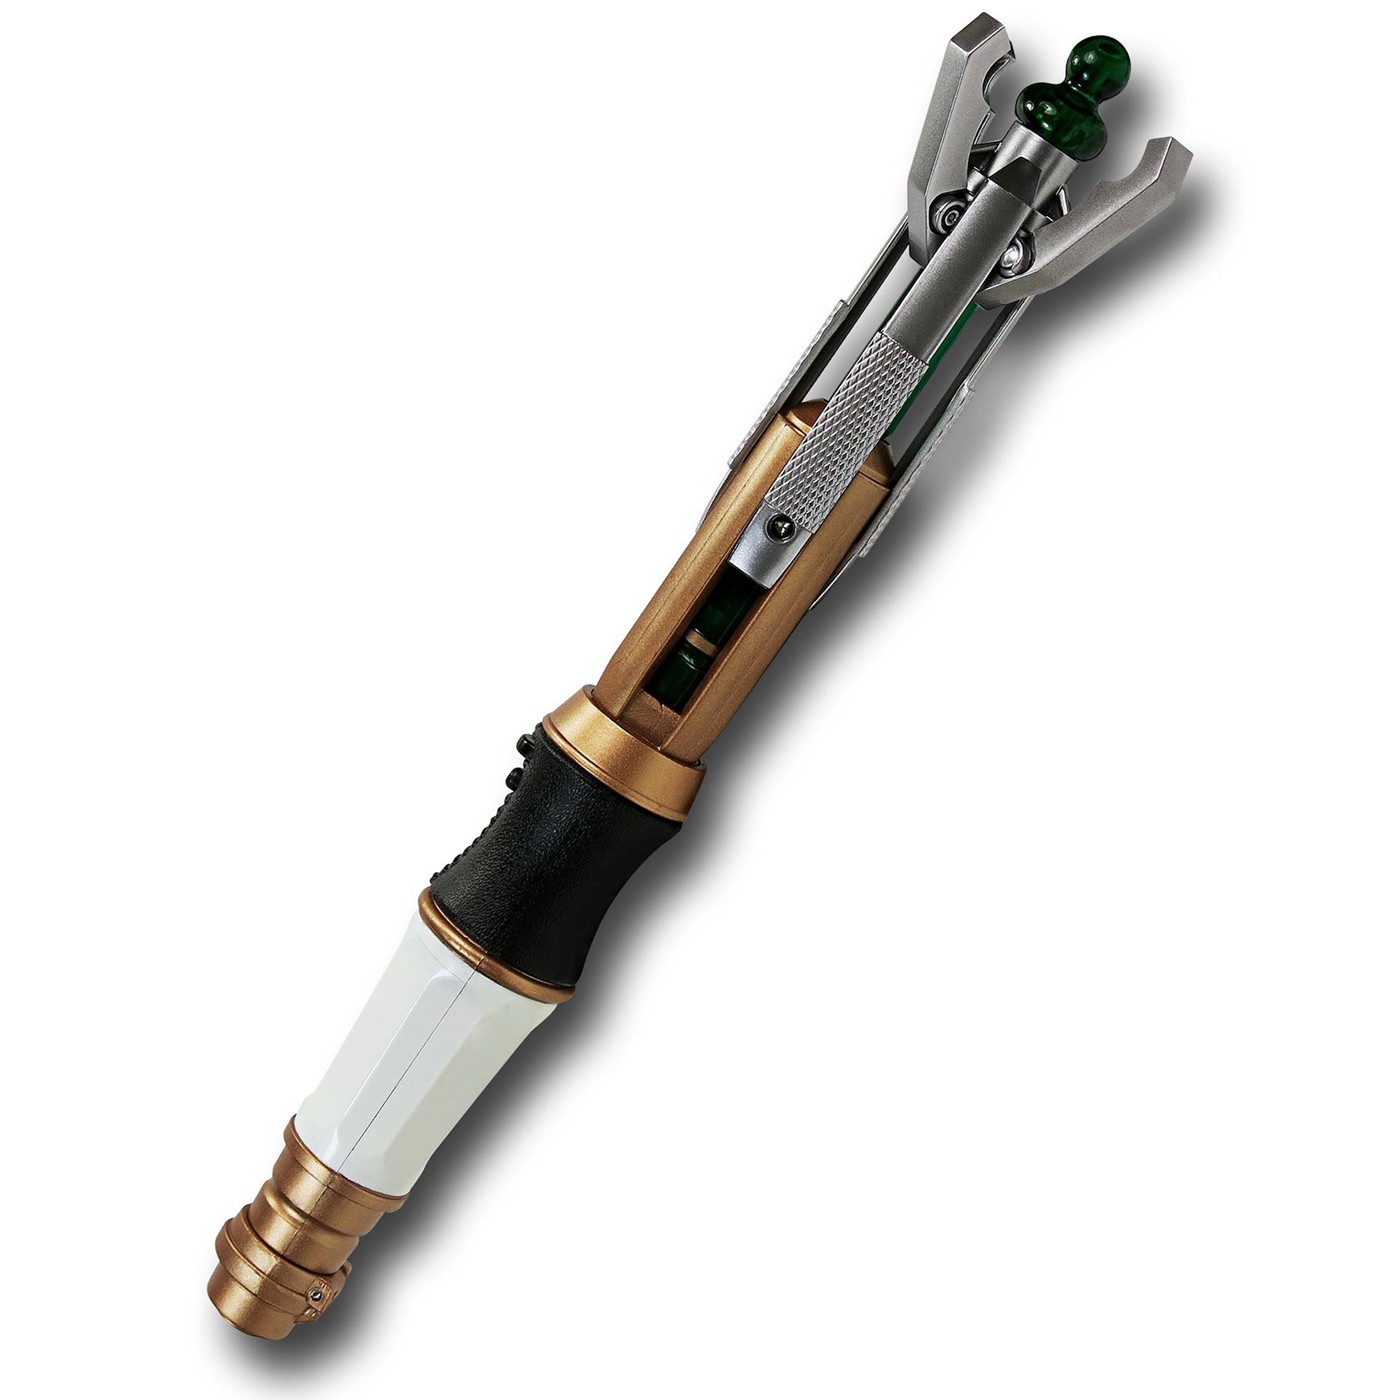 Doctor Who 11th Doctor Sonic Screwdriver.